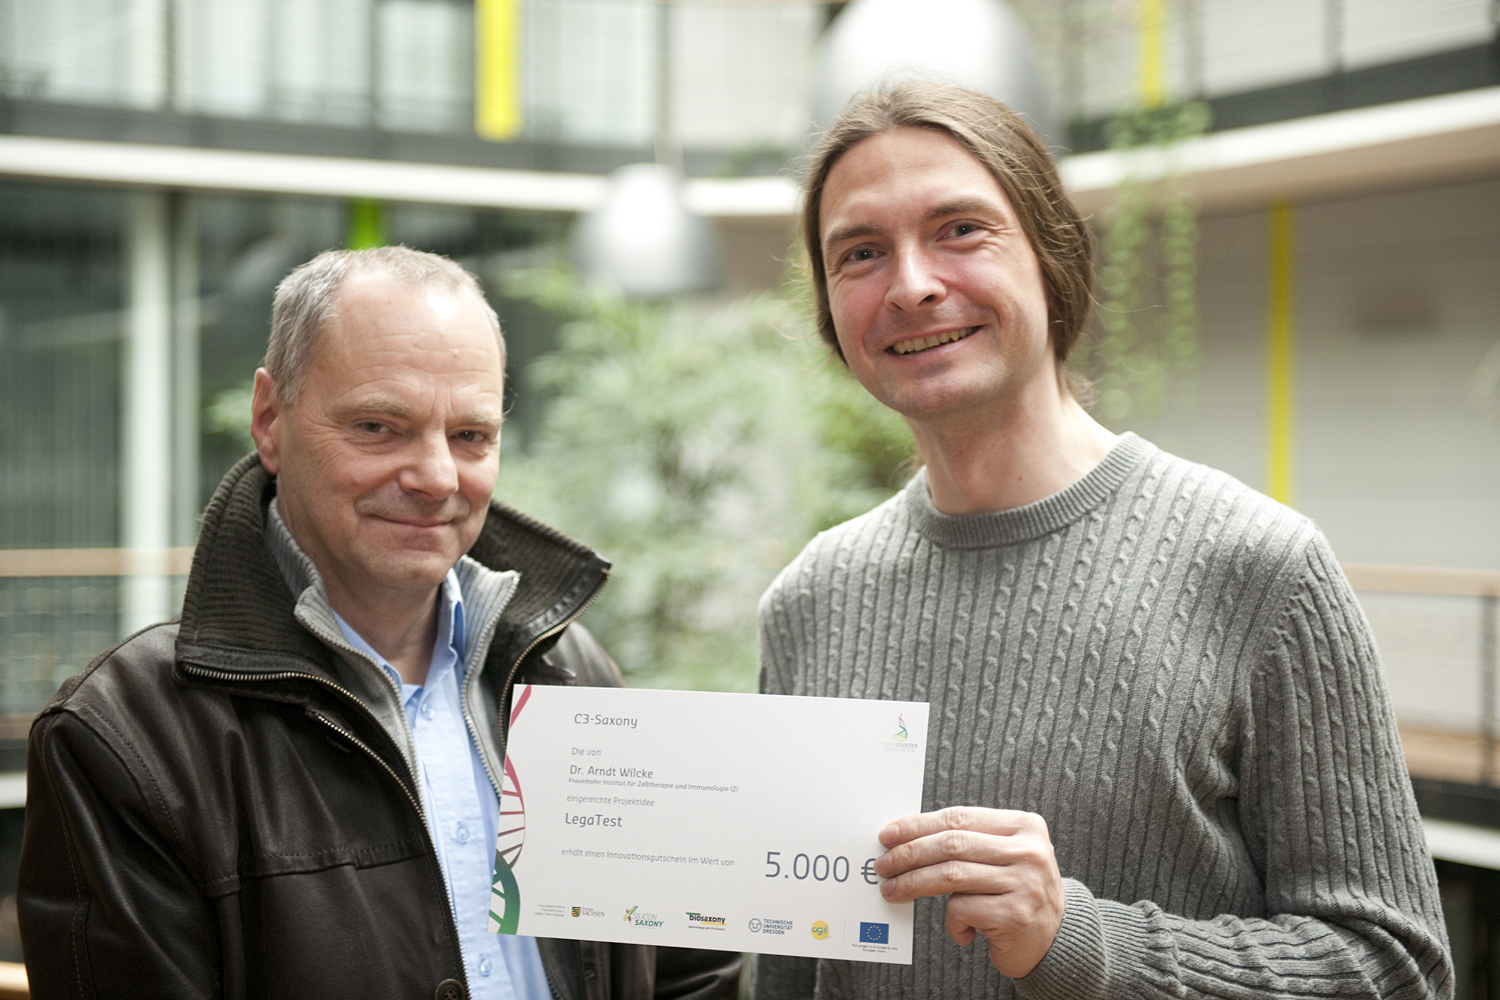 On 8 January 2015, Dr. Arndt Wilcke (r.) received an innovation voucher in the amount of 5,000 euros, passed by Thomas Gatz by the project C3 Saxony.